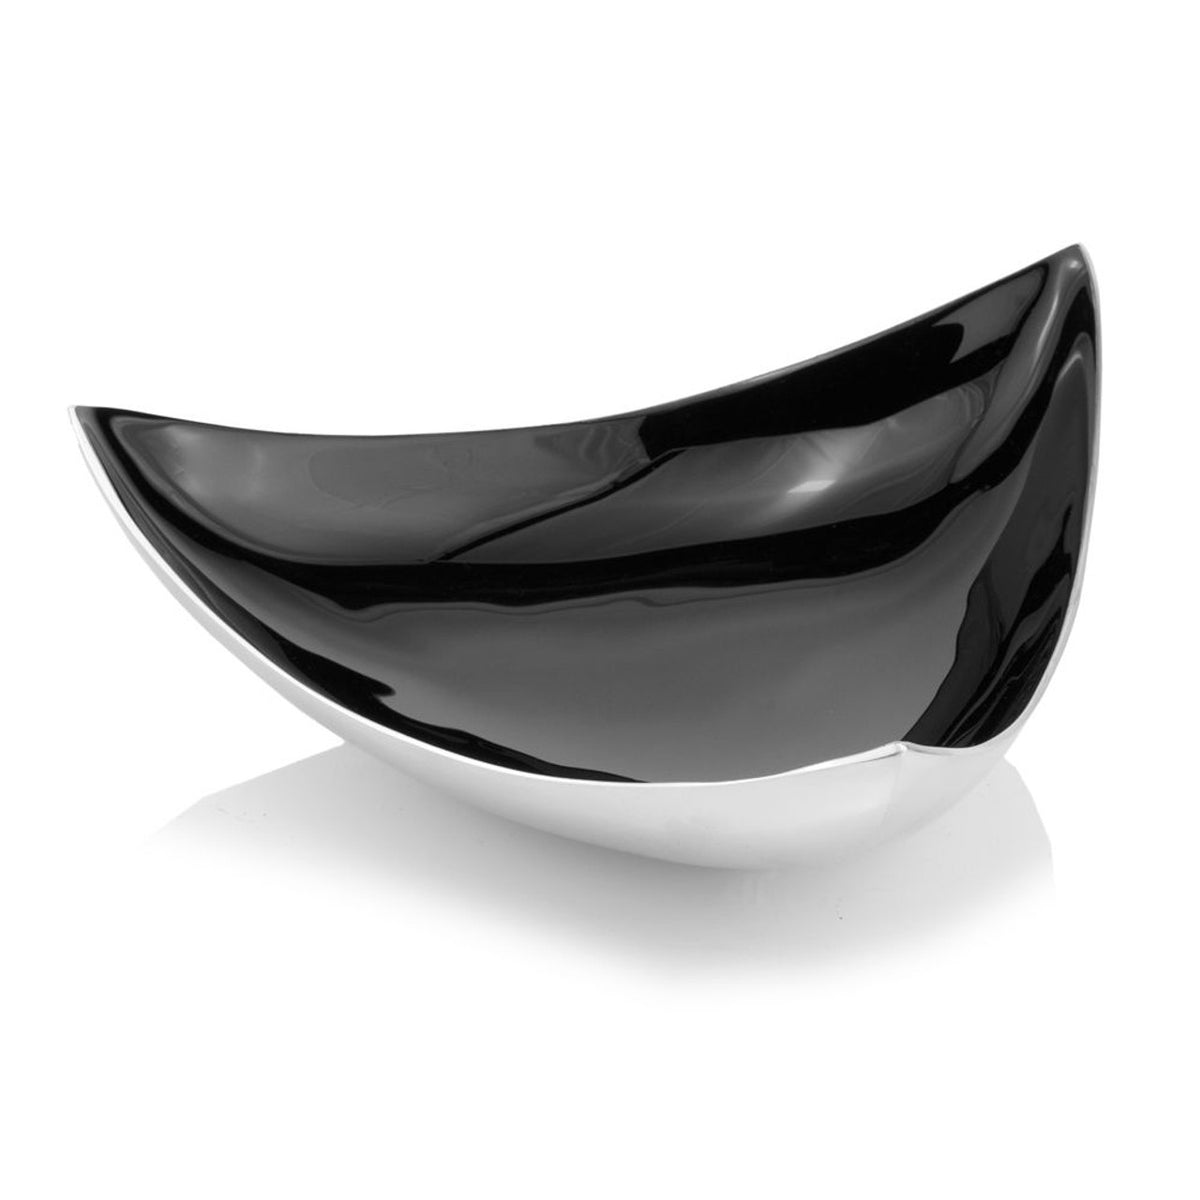 Triangulated Silver and Black Polished Decorative Bowl Tray